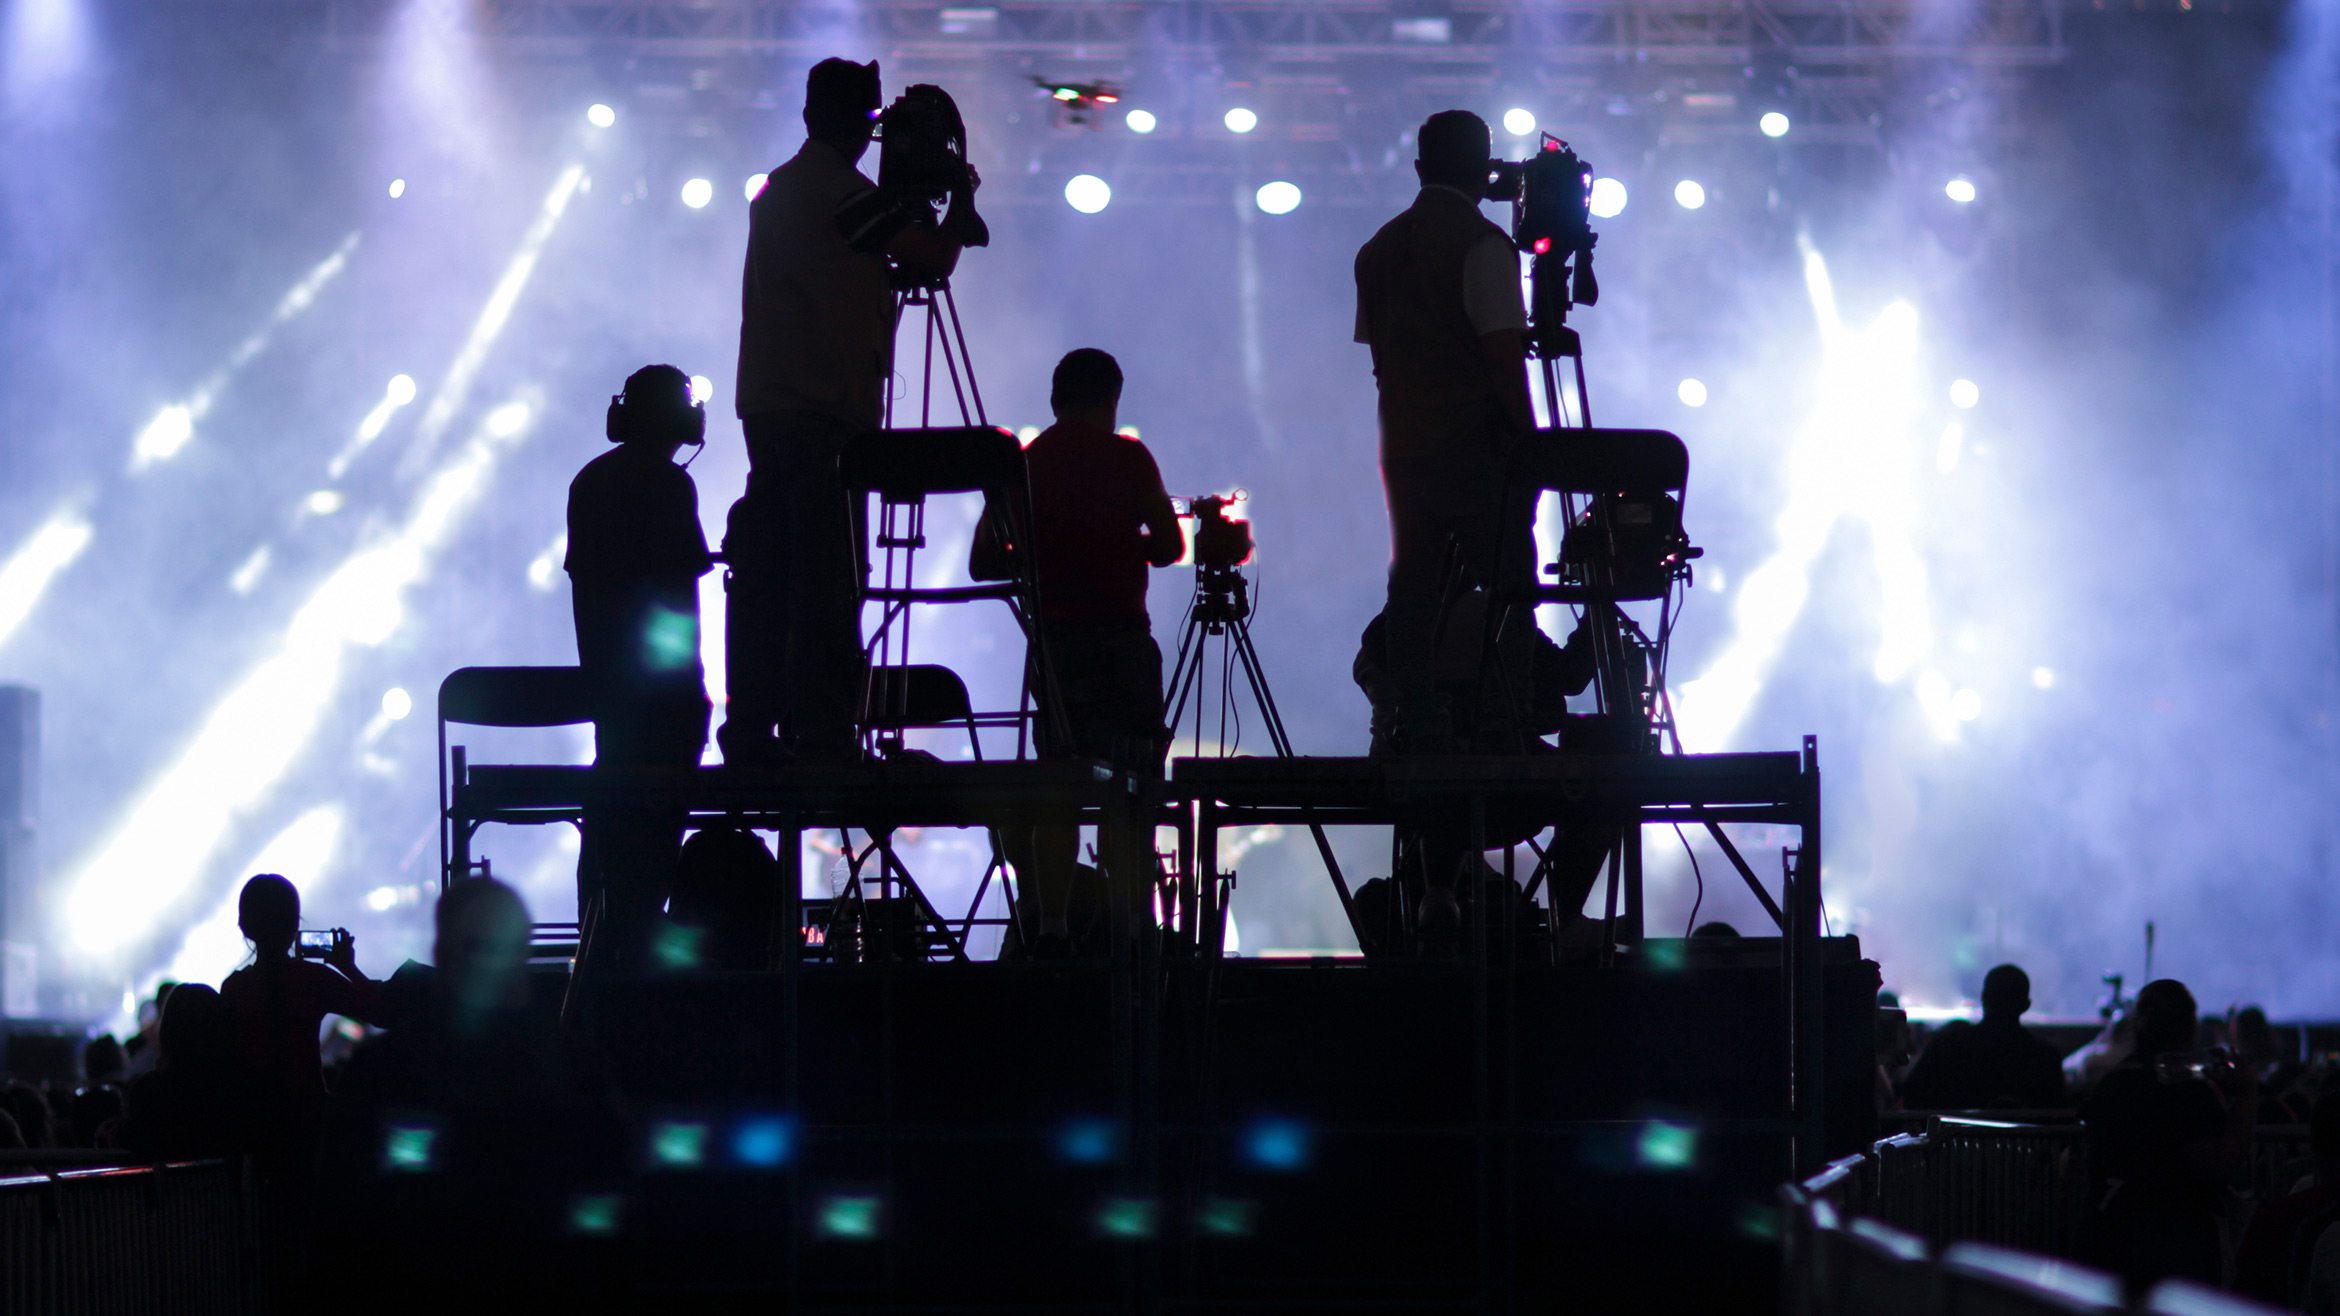 Corporate events full event planning and production in Greece and Italy